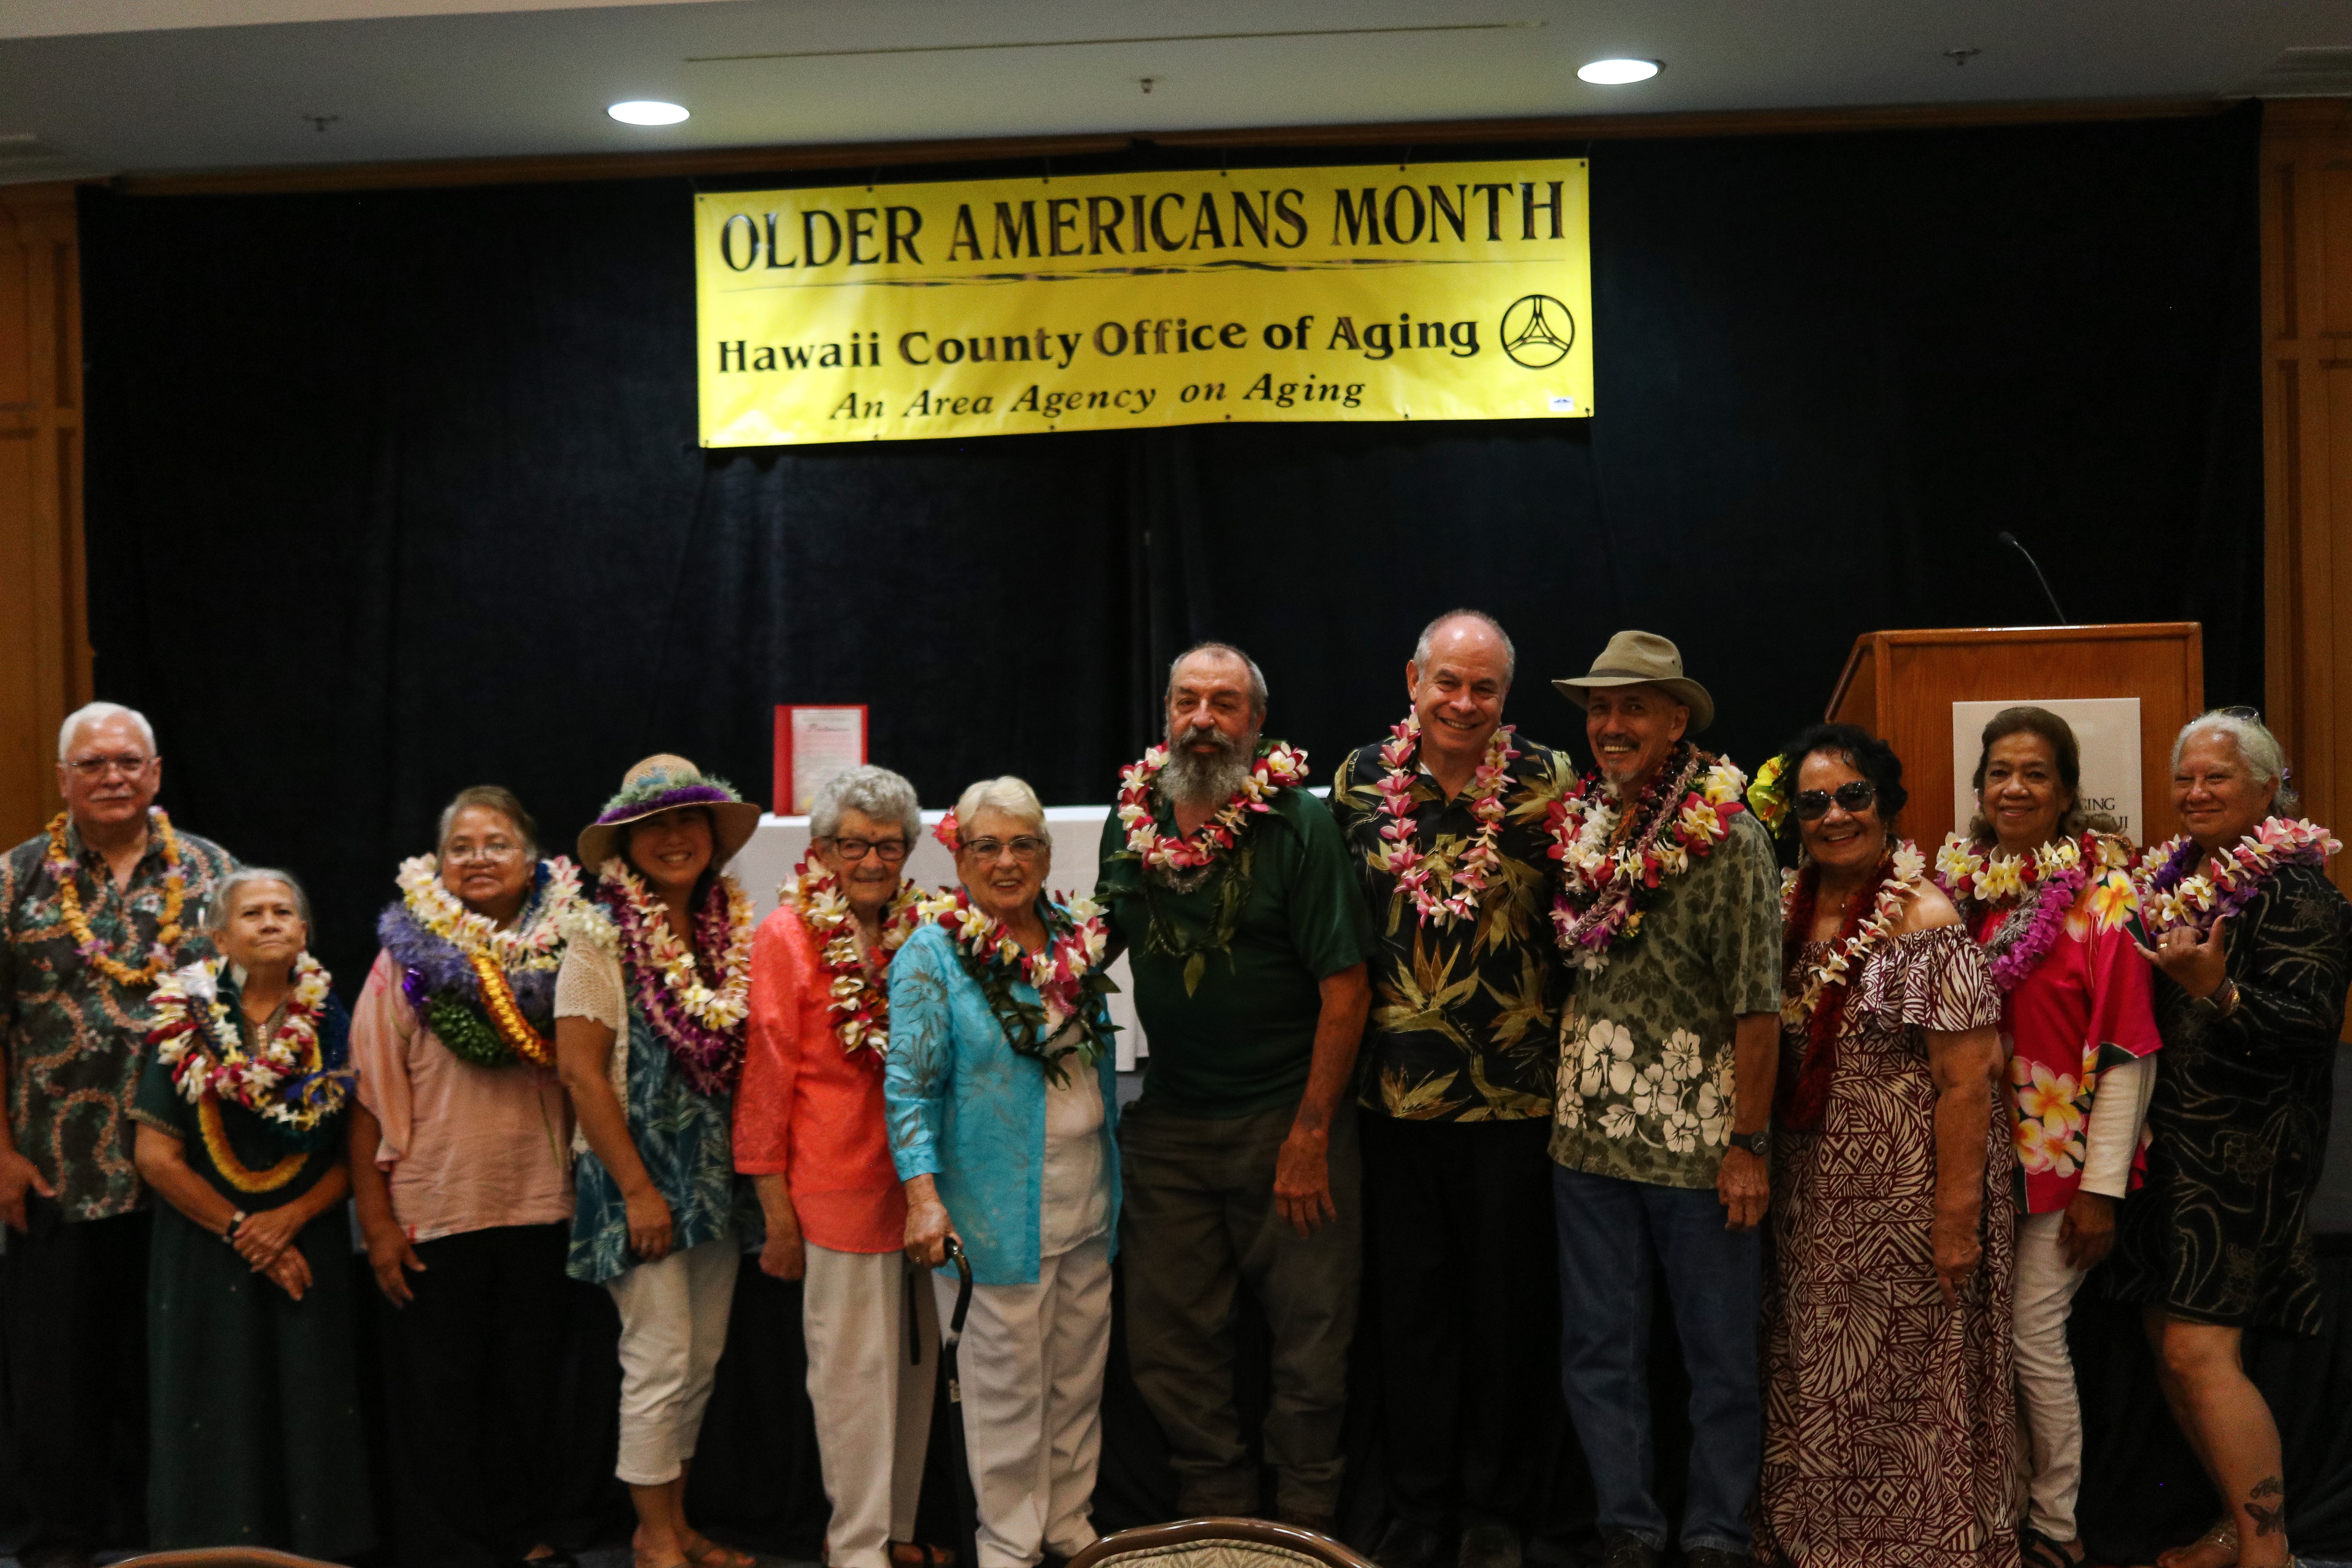 Nominee's left to right with Executive on Aging - William H. Farr and Hawai'i County Mayor Mitch Roth<br />William H. Farr, Bridgett Pittman, Fely Villegas, Mahealani Yong Snell, Dorothy Hafner, Lucy Rogge, Carl Ferrin, Mayor Mitch Roth, Albert Pacheco Jr., Charlotte Almarz, Linda Whang, Lovette White-Kuamo'o